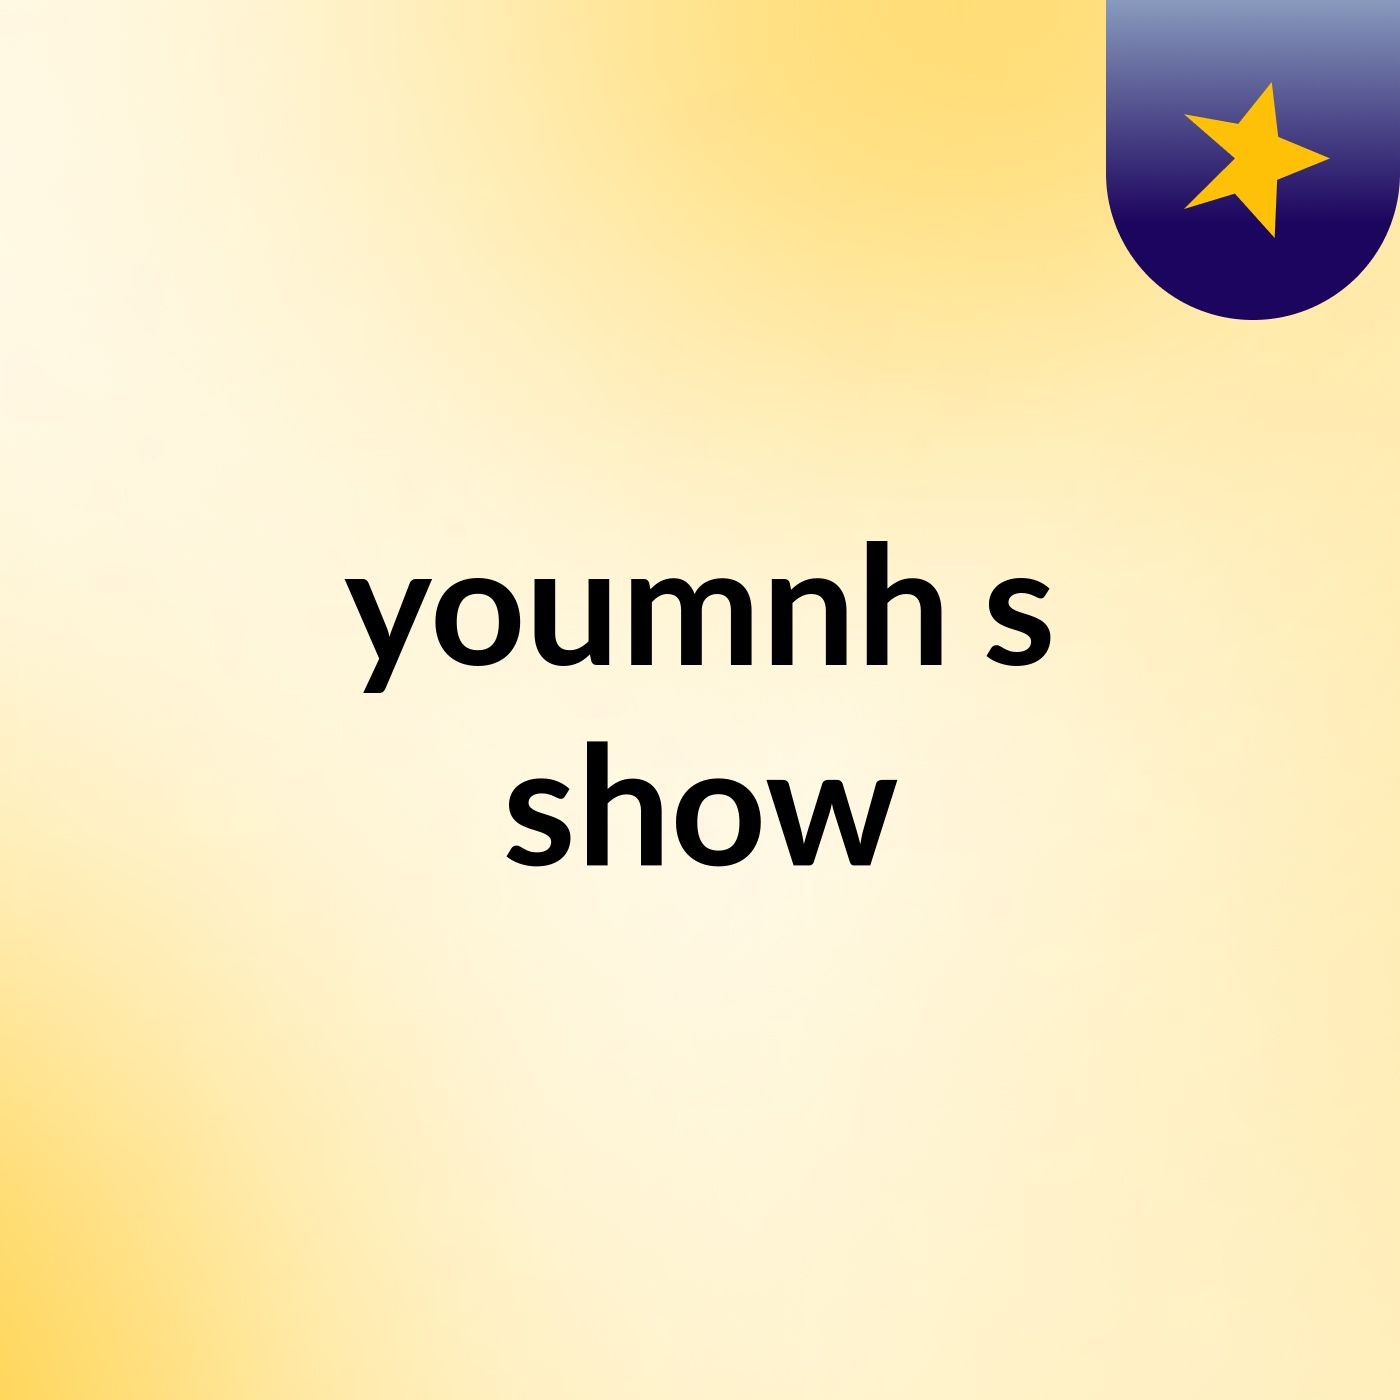 youmnh's show